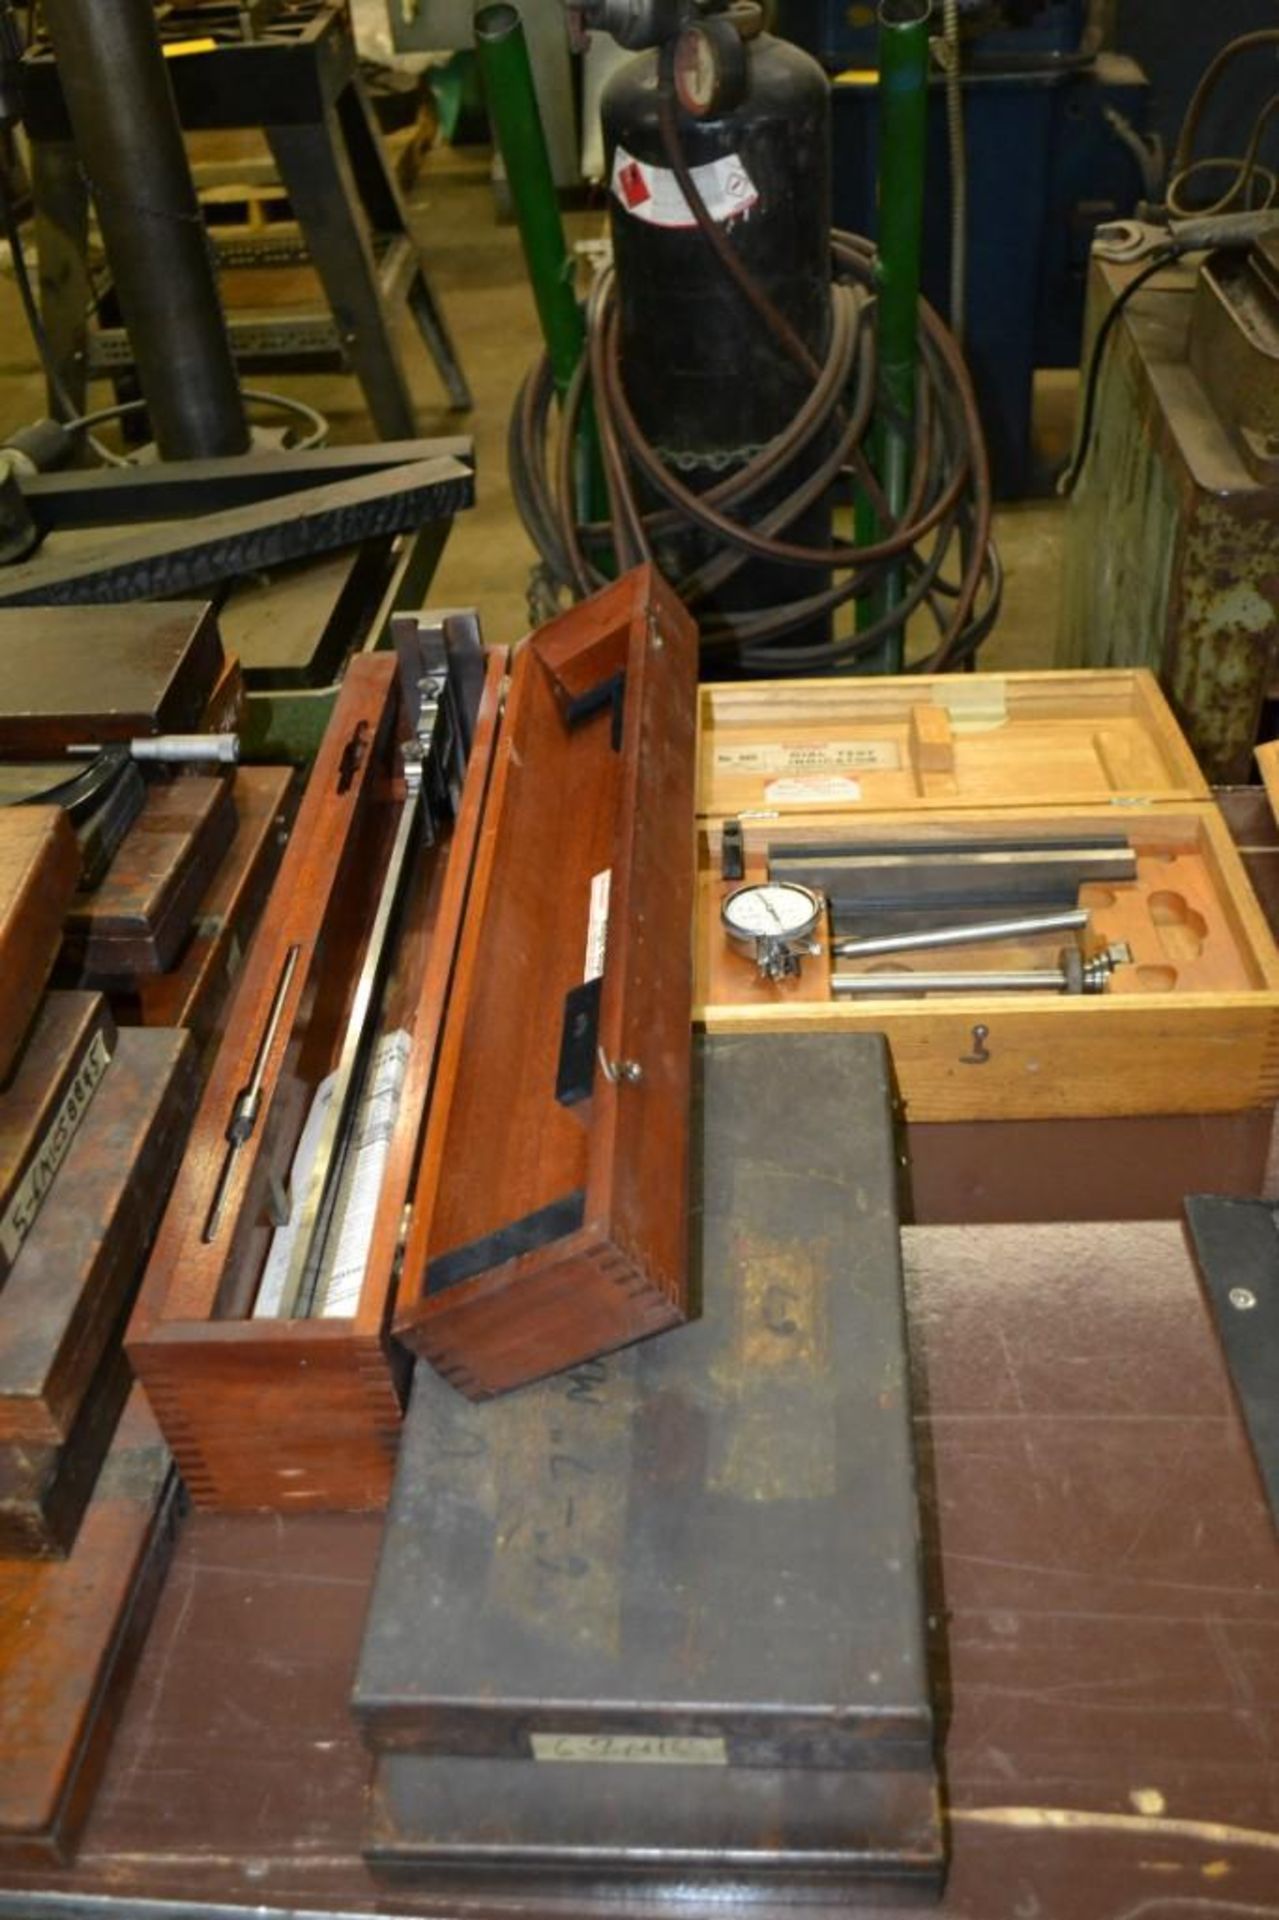 Lot Assorted Calipers and Micrometers in Wood Cases - Image 4 of 4